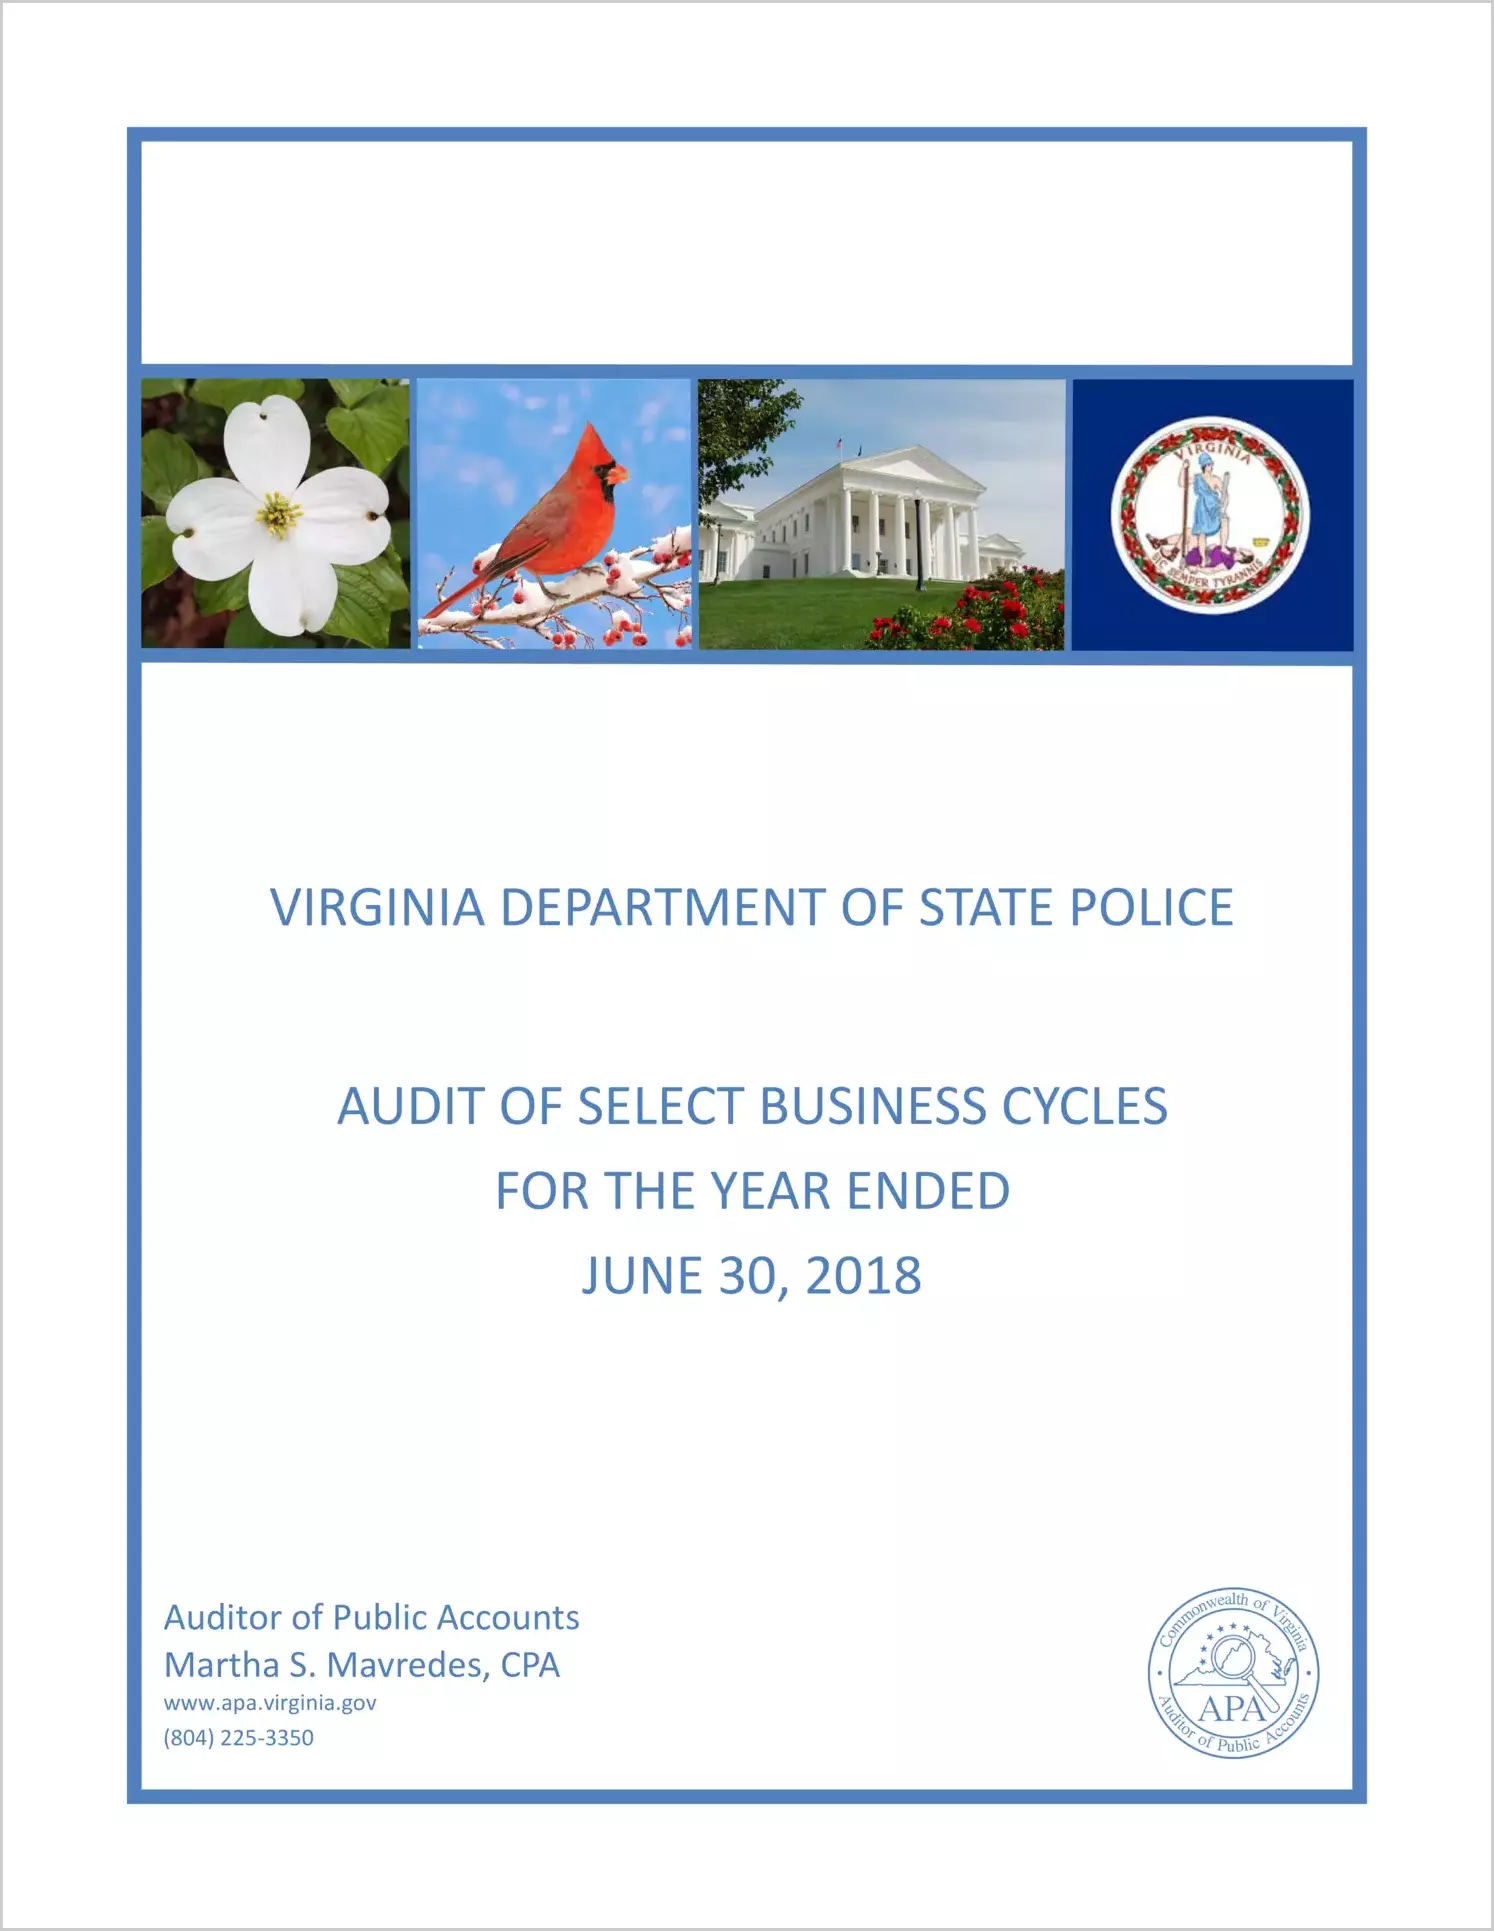 Virginia Department of State Police Audit of Selected Business Cycles for the year ended June 30, 2018